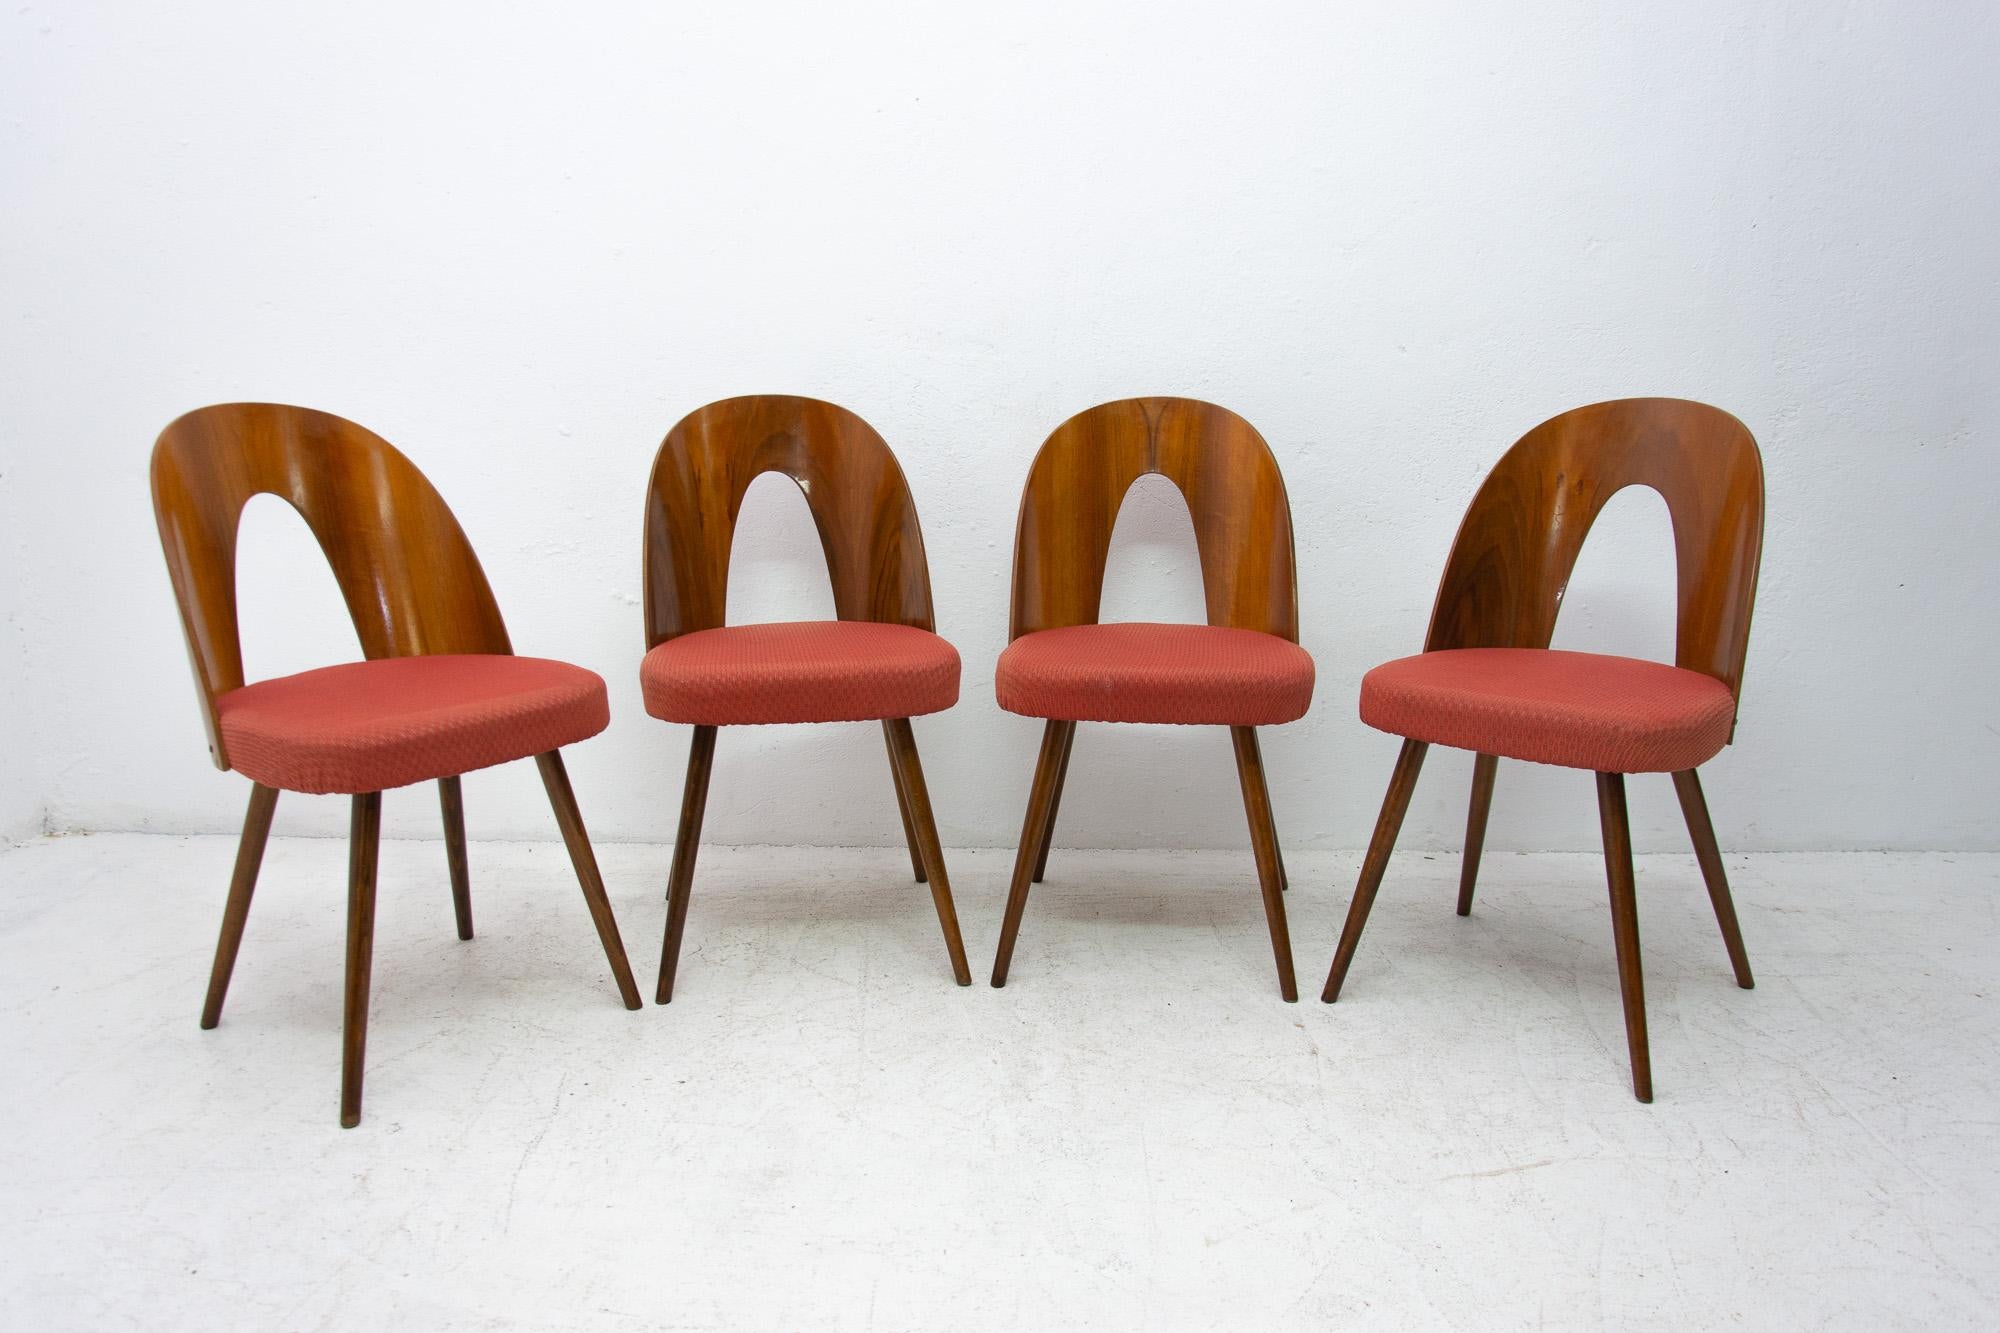 Midcentury bentwood dining chairs by Antonin Suman. The chairs feature an upholstery, bent plywood backrests in walnut veneer and beechwood legs. It was made in the former Czechoslovakia in the 1960s. The chairs are in very good vintage condition,